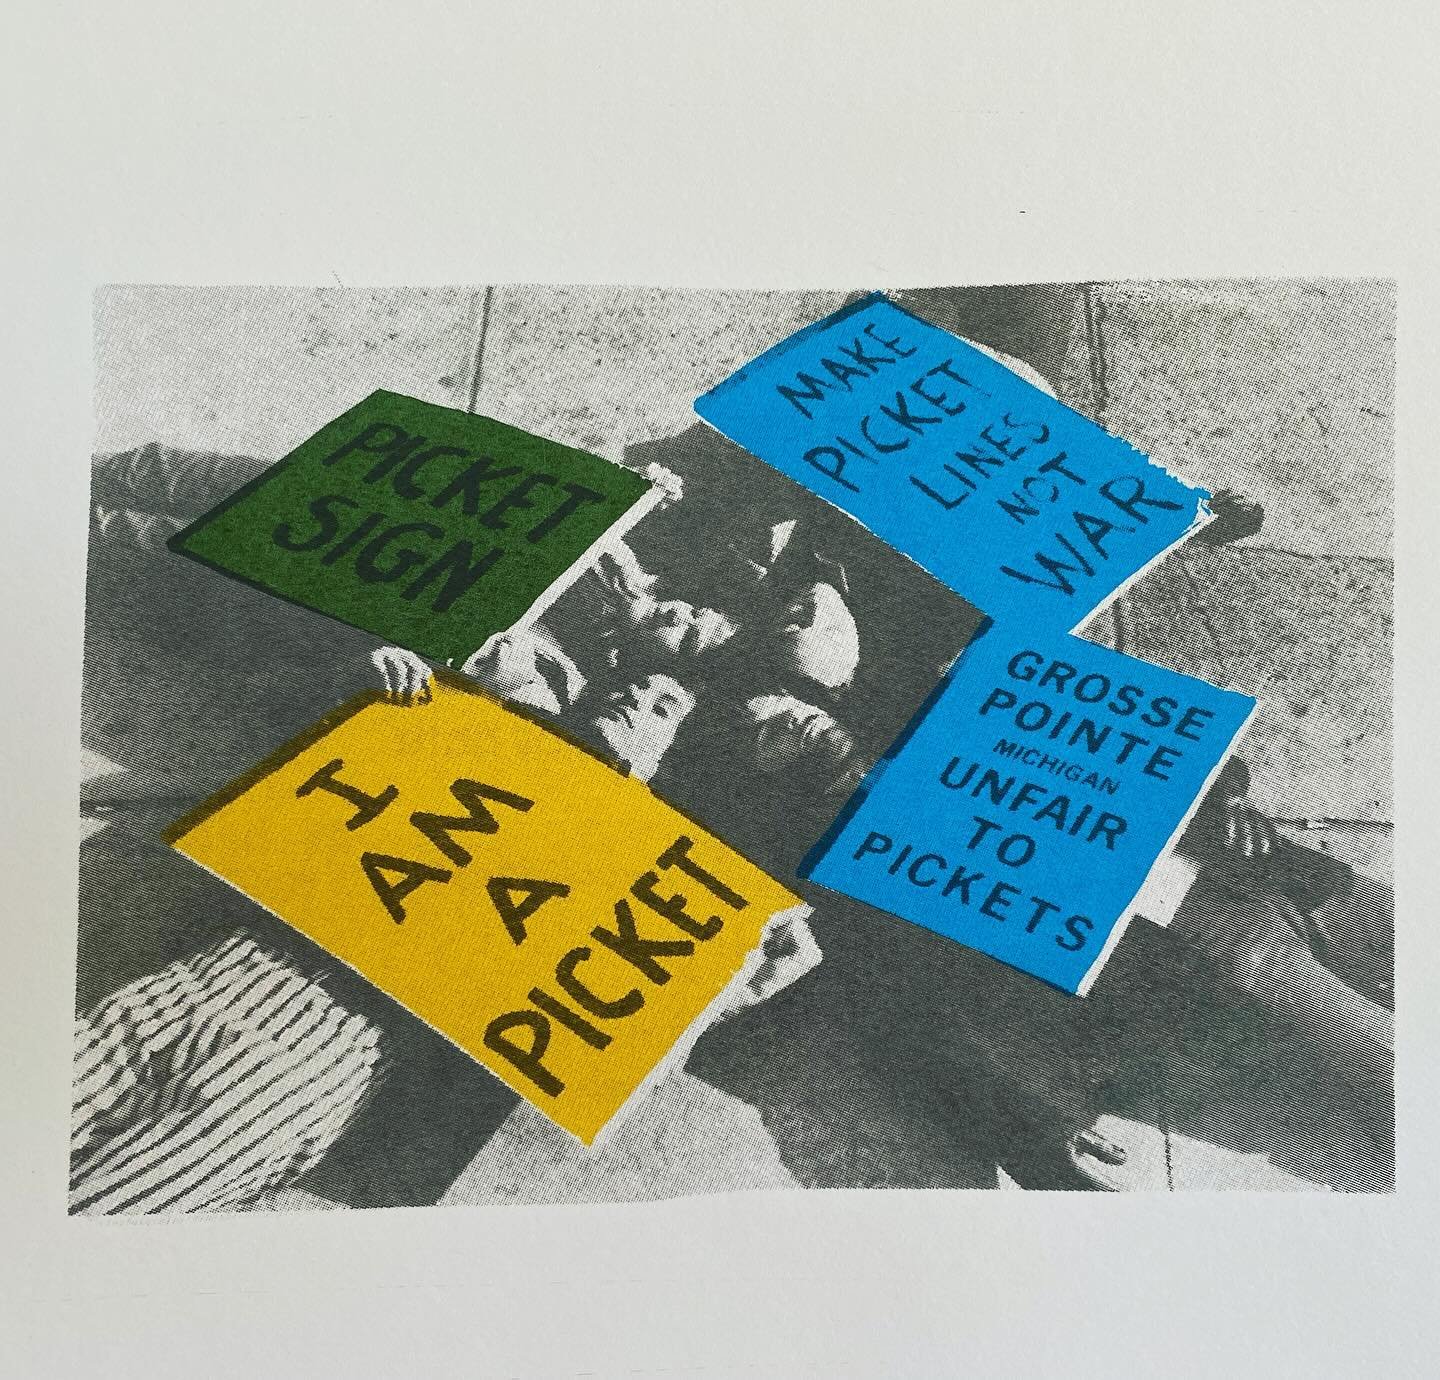 Screen printing experiments from the start of my residency @peacockandtheworm a couple weeks ago. 

This image is from a peaceful protest against Michigan&rsquo;s law that people can&rsquo;t picket  without a permit. Image from 1970&rsquo;s. 

&lsquo